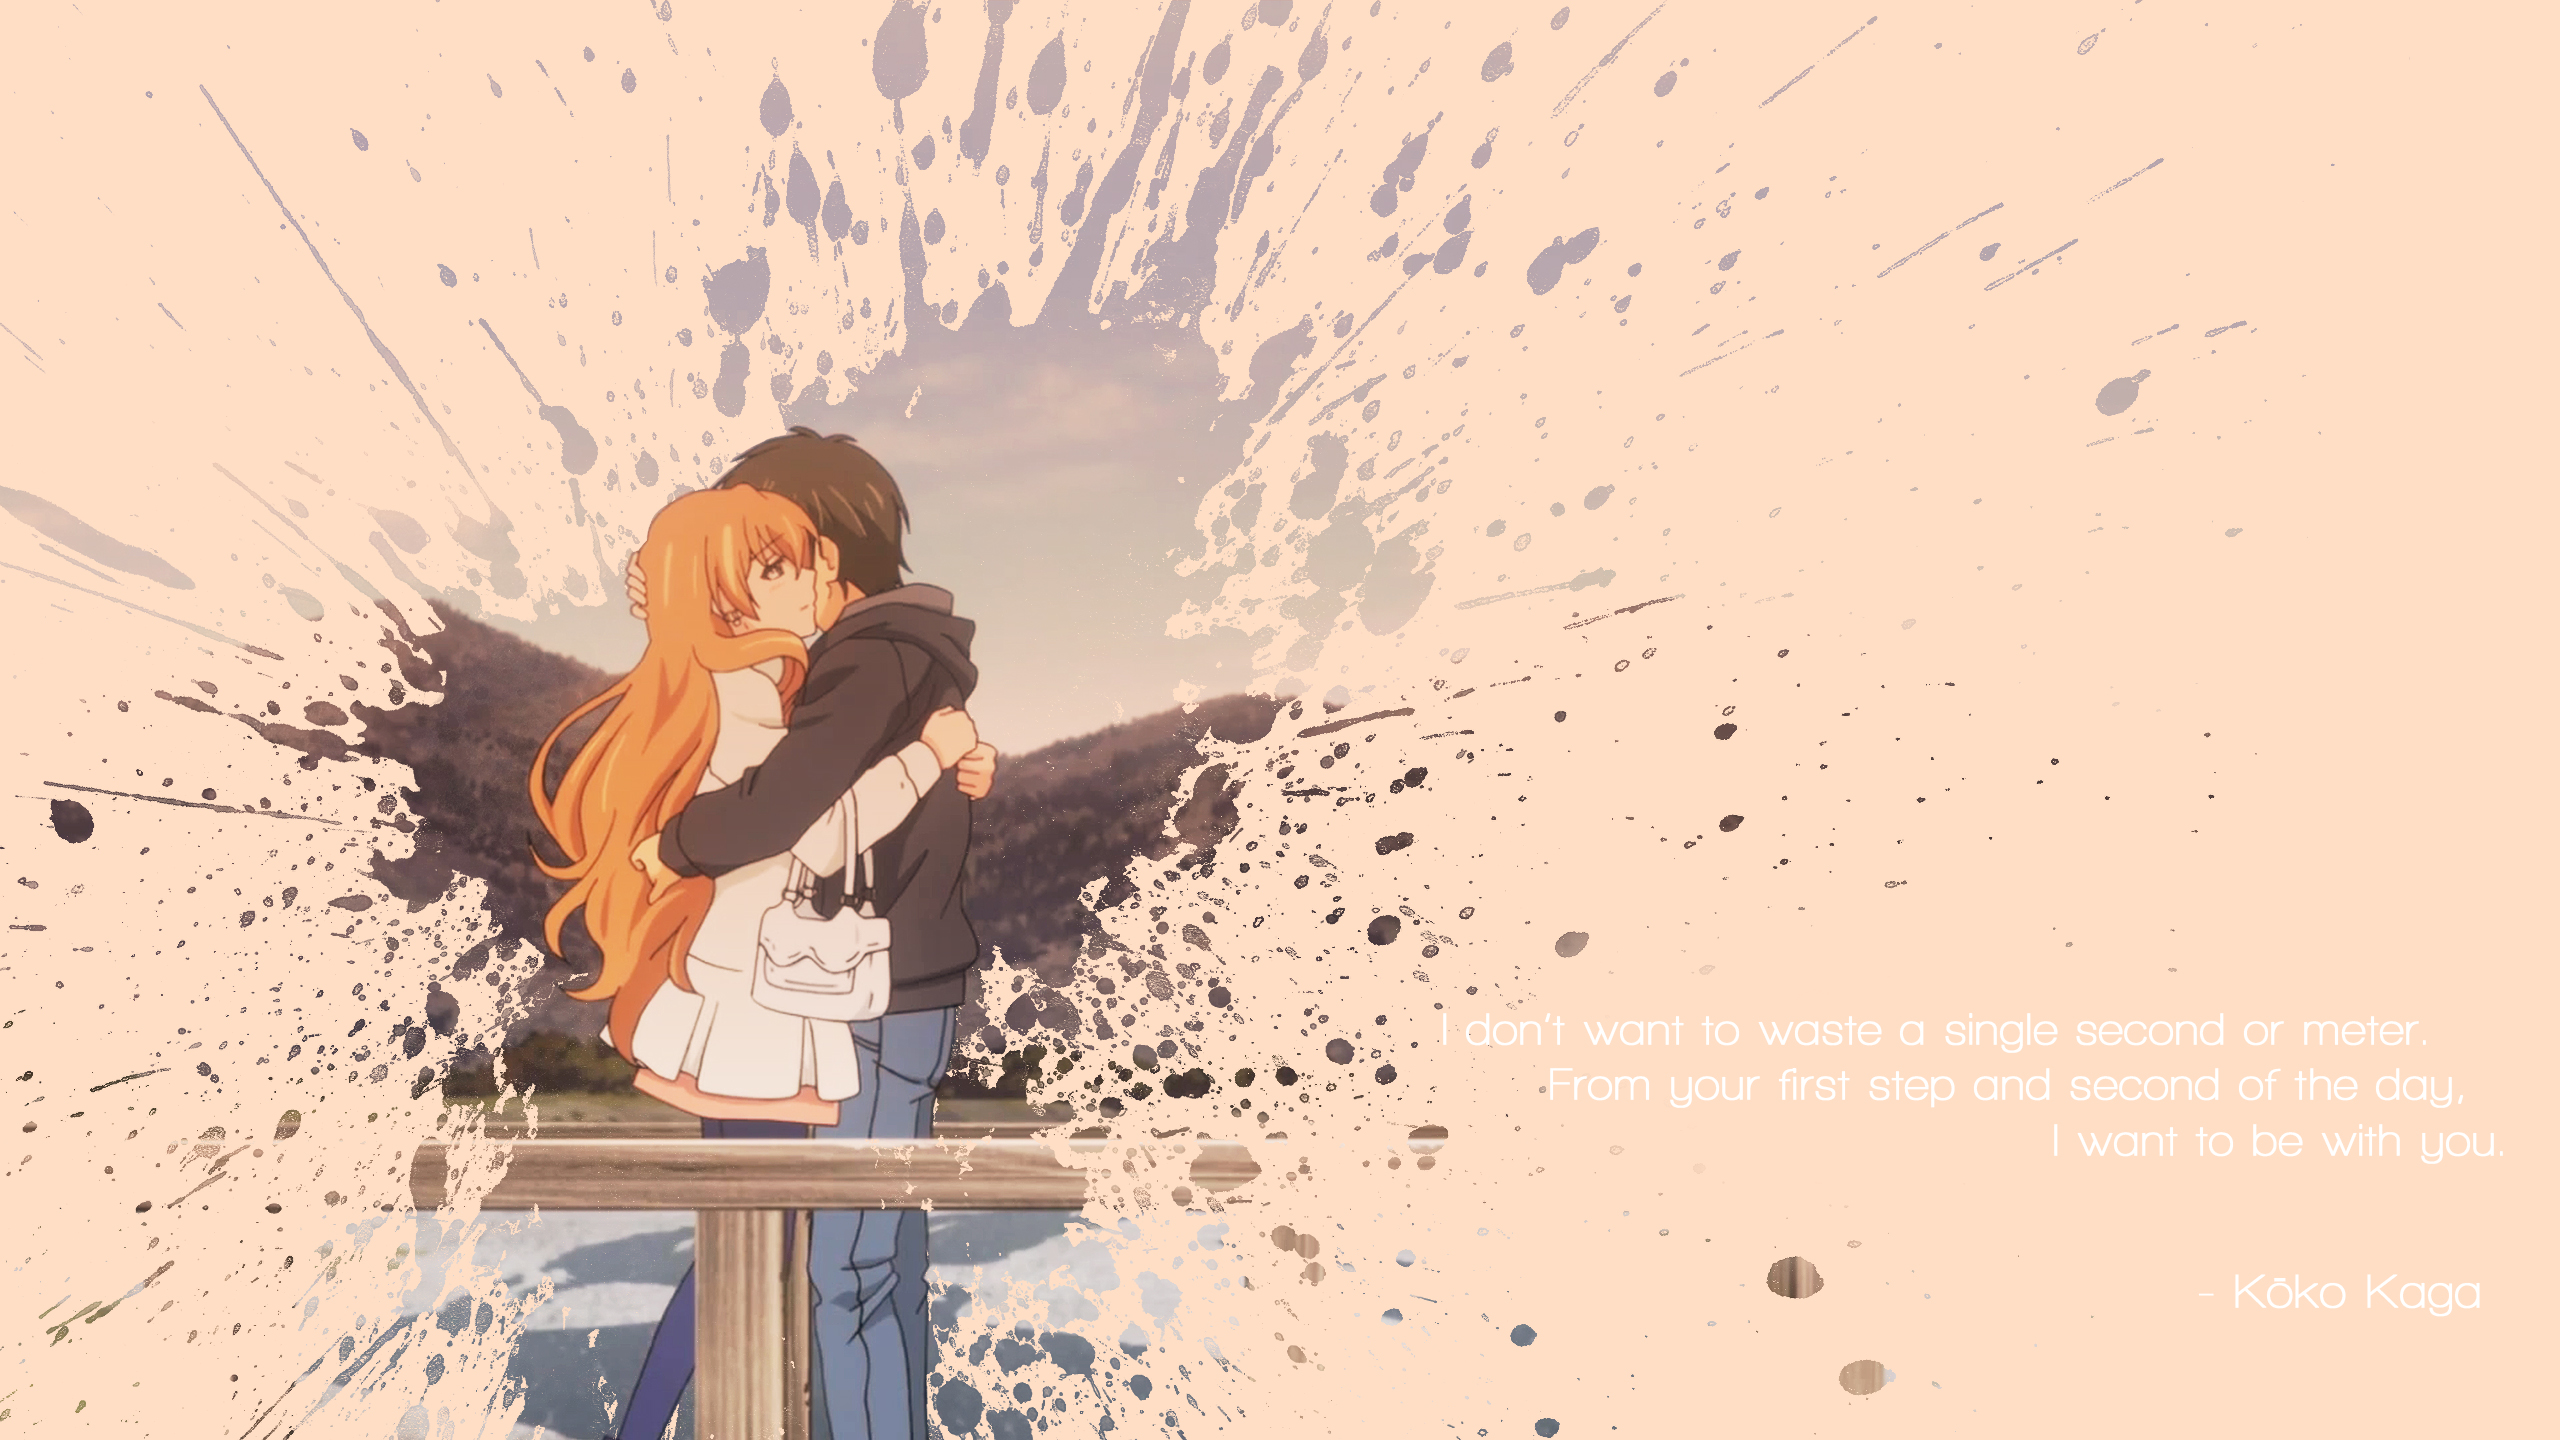 Golden Time - I Want to Be With You (Wallpaper) by SKIGZdoesART on  DeviantArt